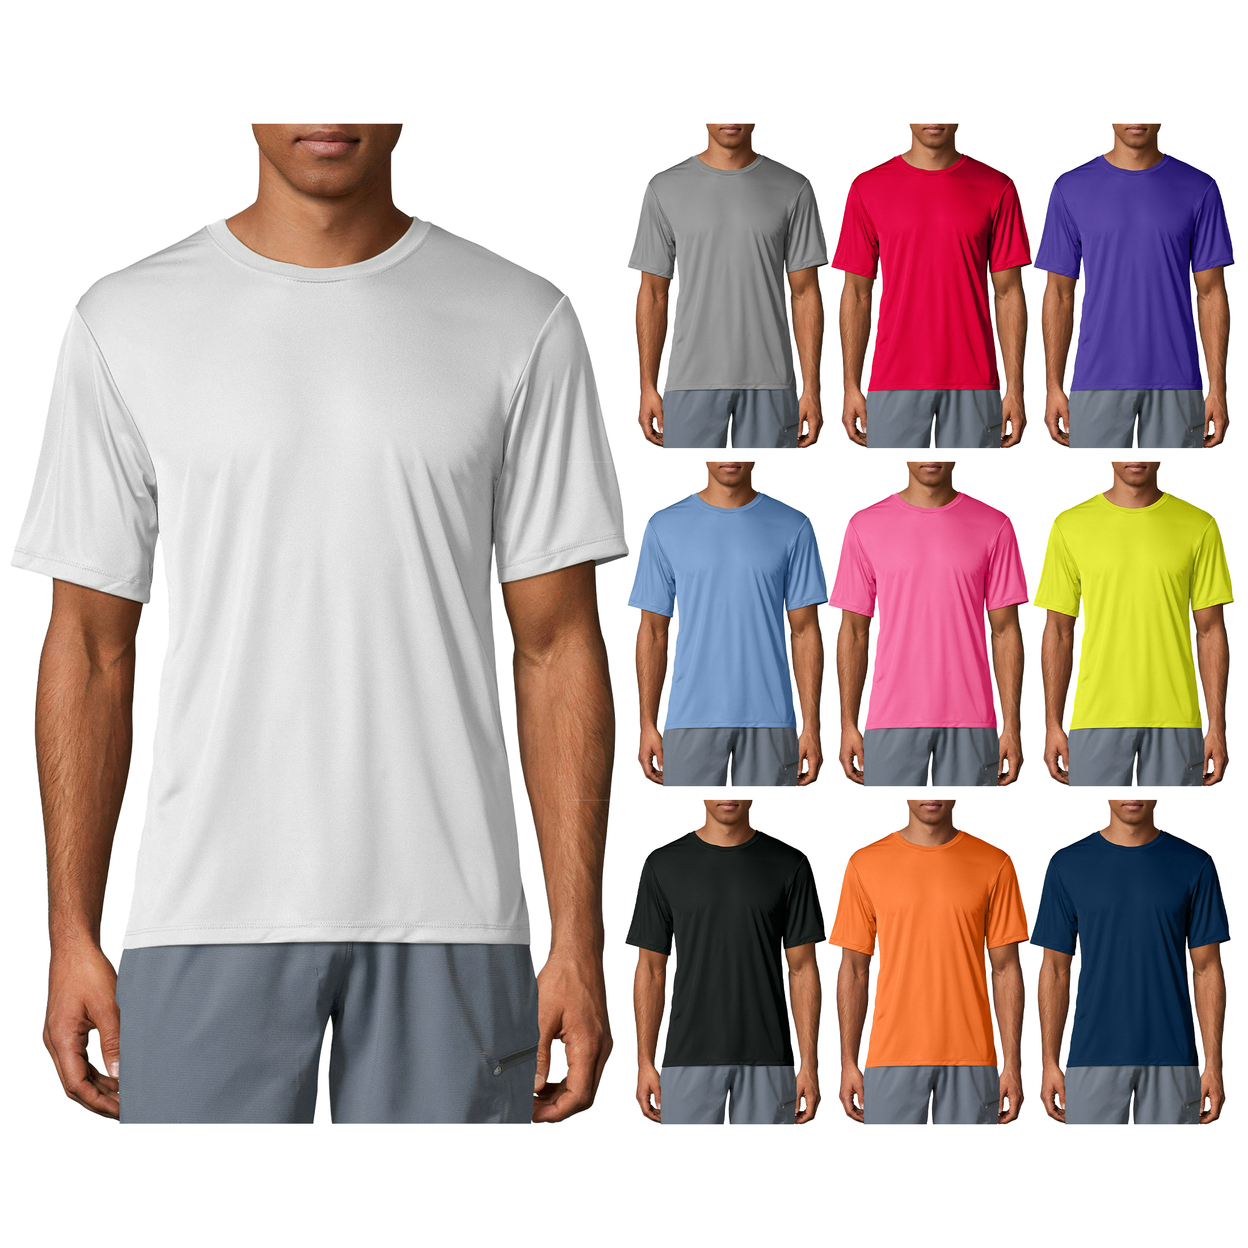 5-Pack: Men's Moisture Wicking Cool Dri-Fit Performance Short Sleeve Crew Neck T-Shirts - X-large